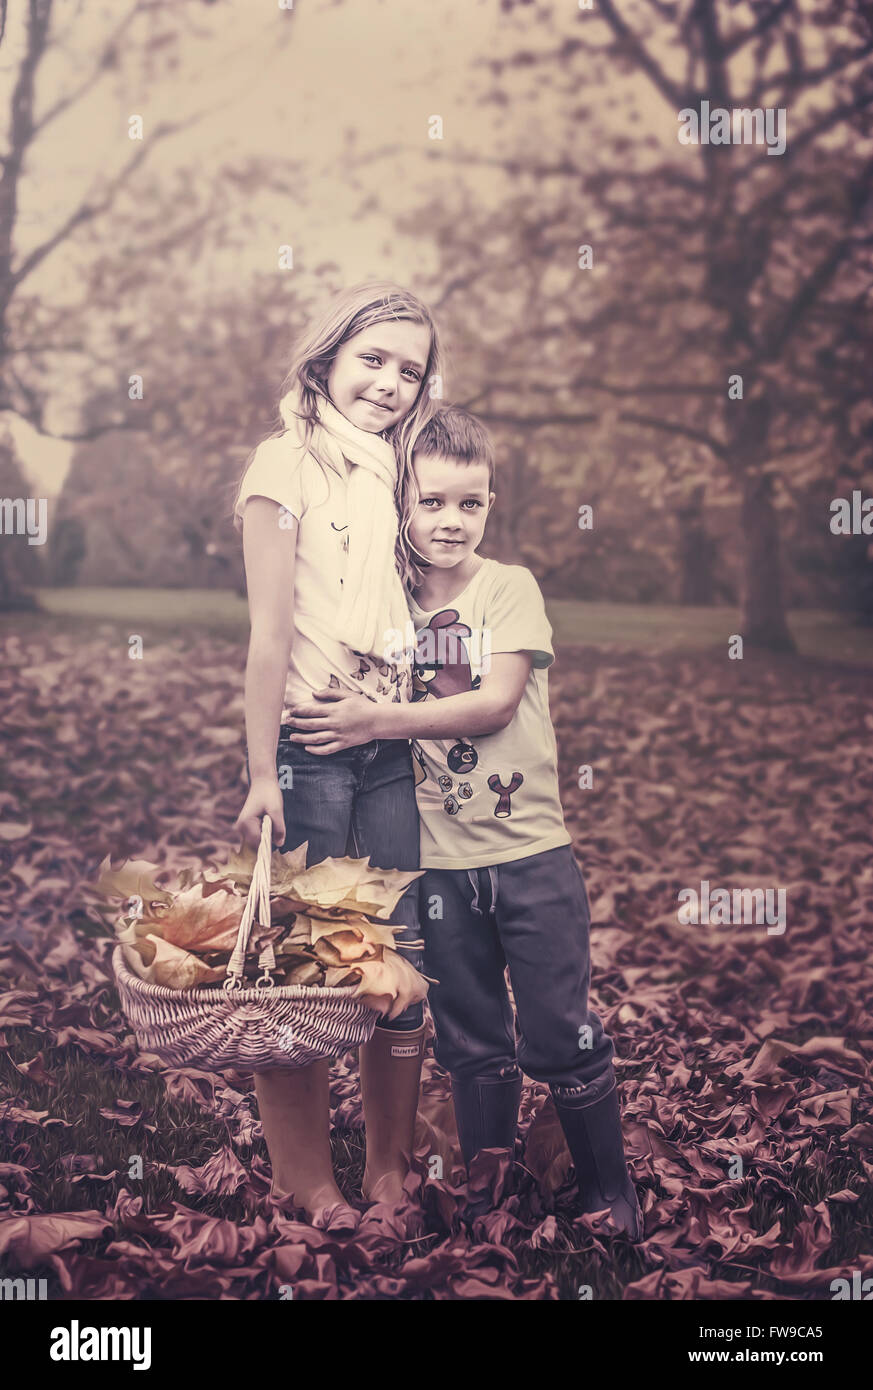 two kids in autumn park holding each other Stock Photo